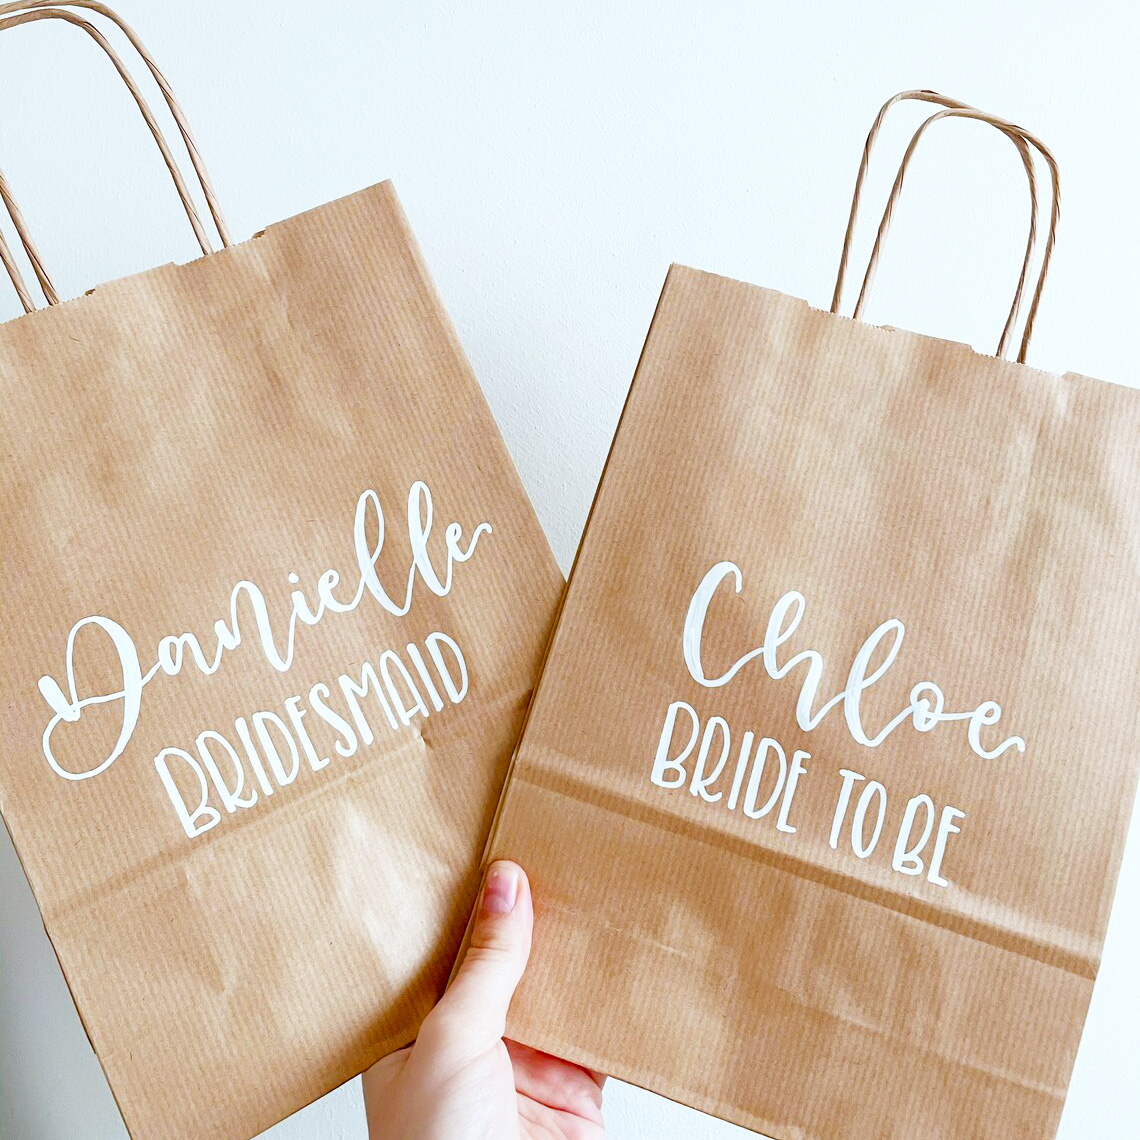 Customised Kraft Paper Gift Bags for hen do. Bridesmaid and Bride to be gift bag